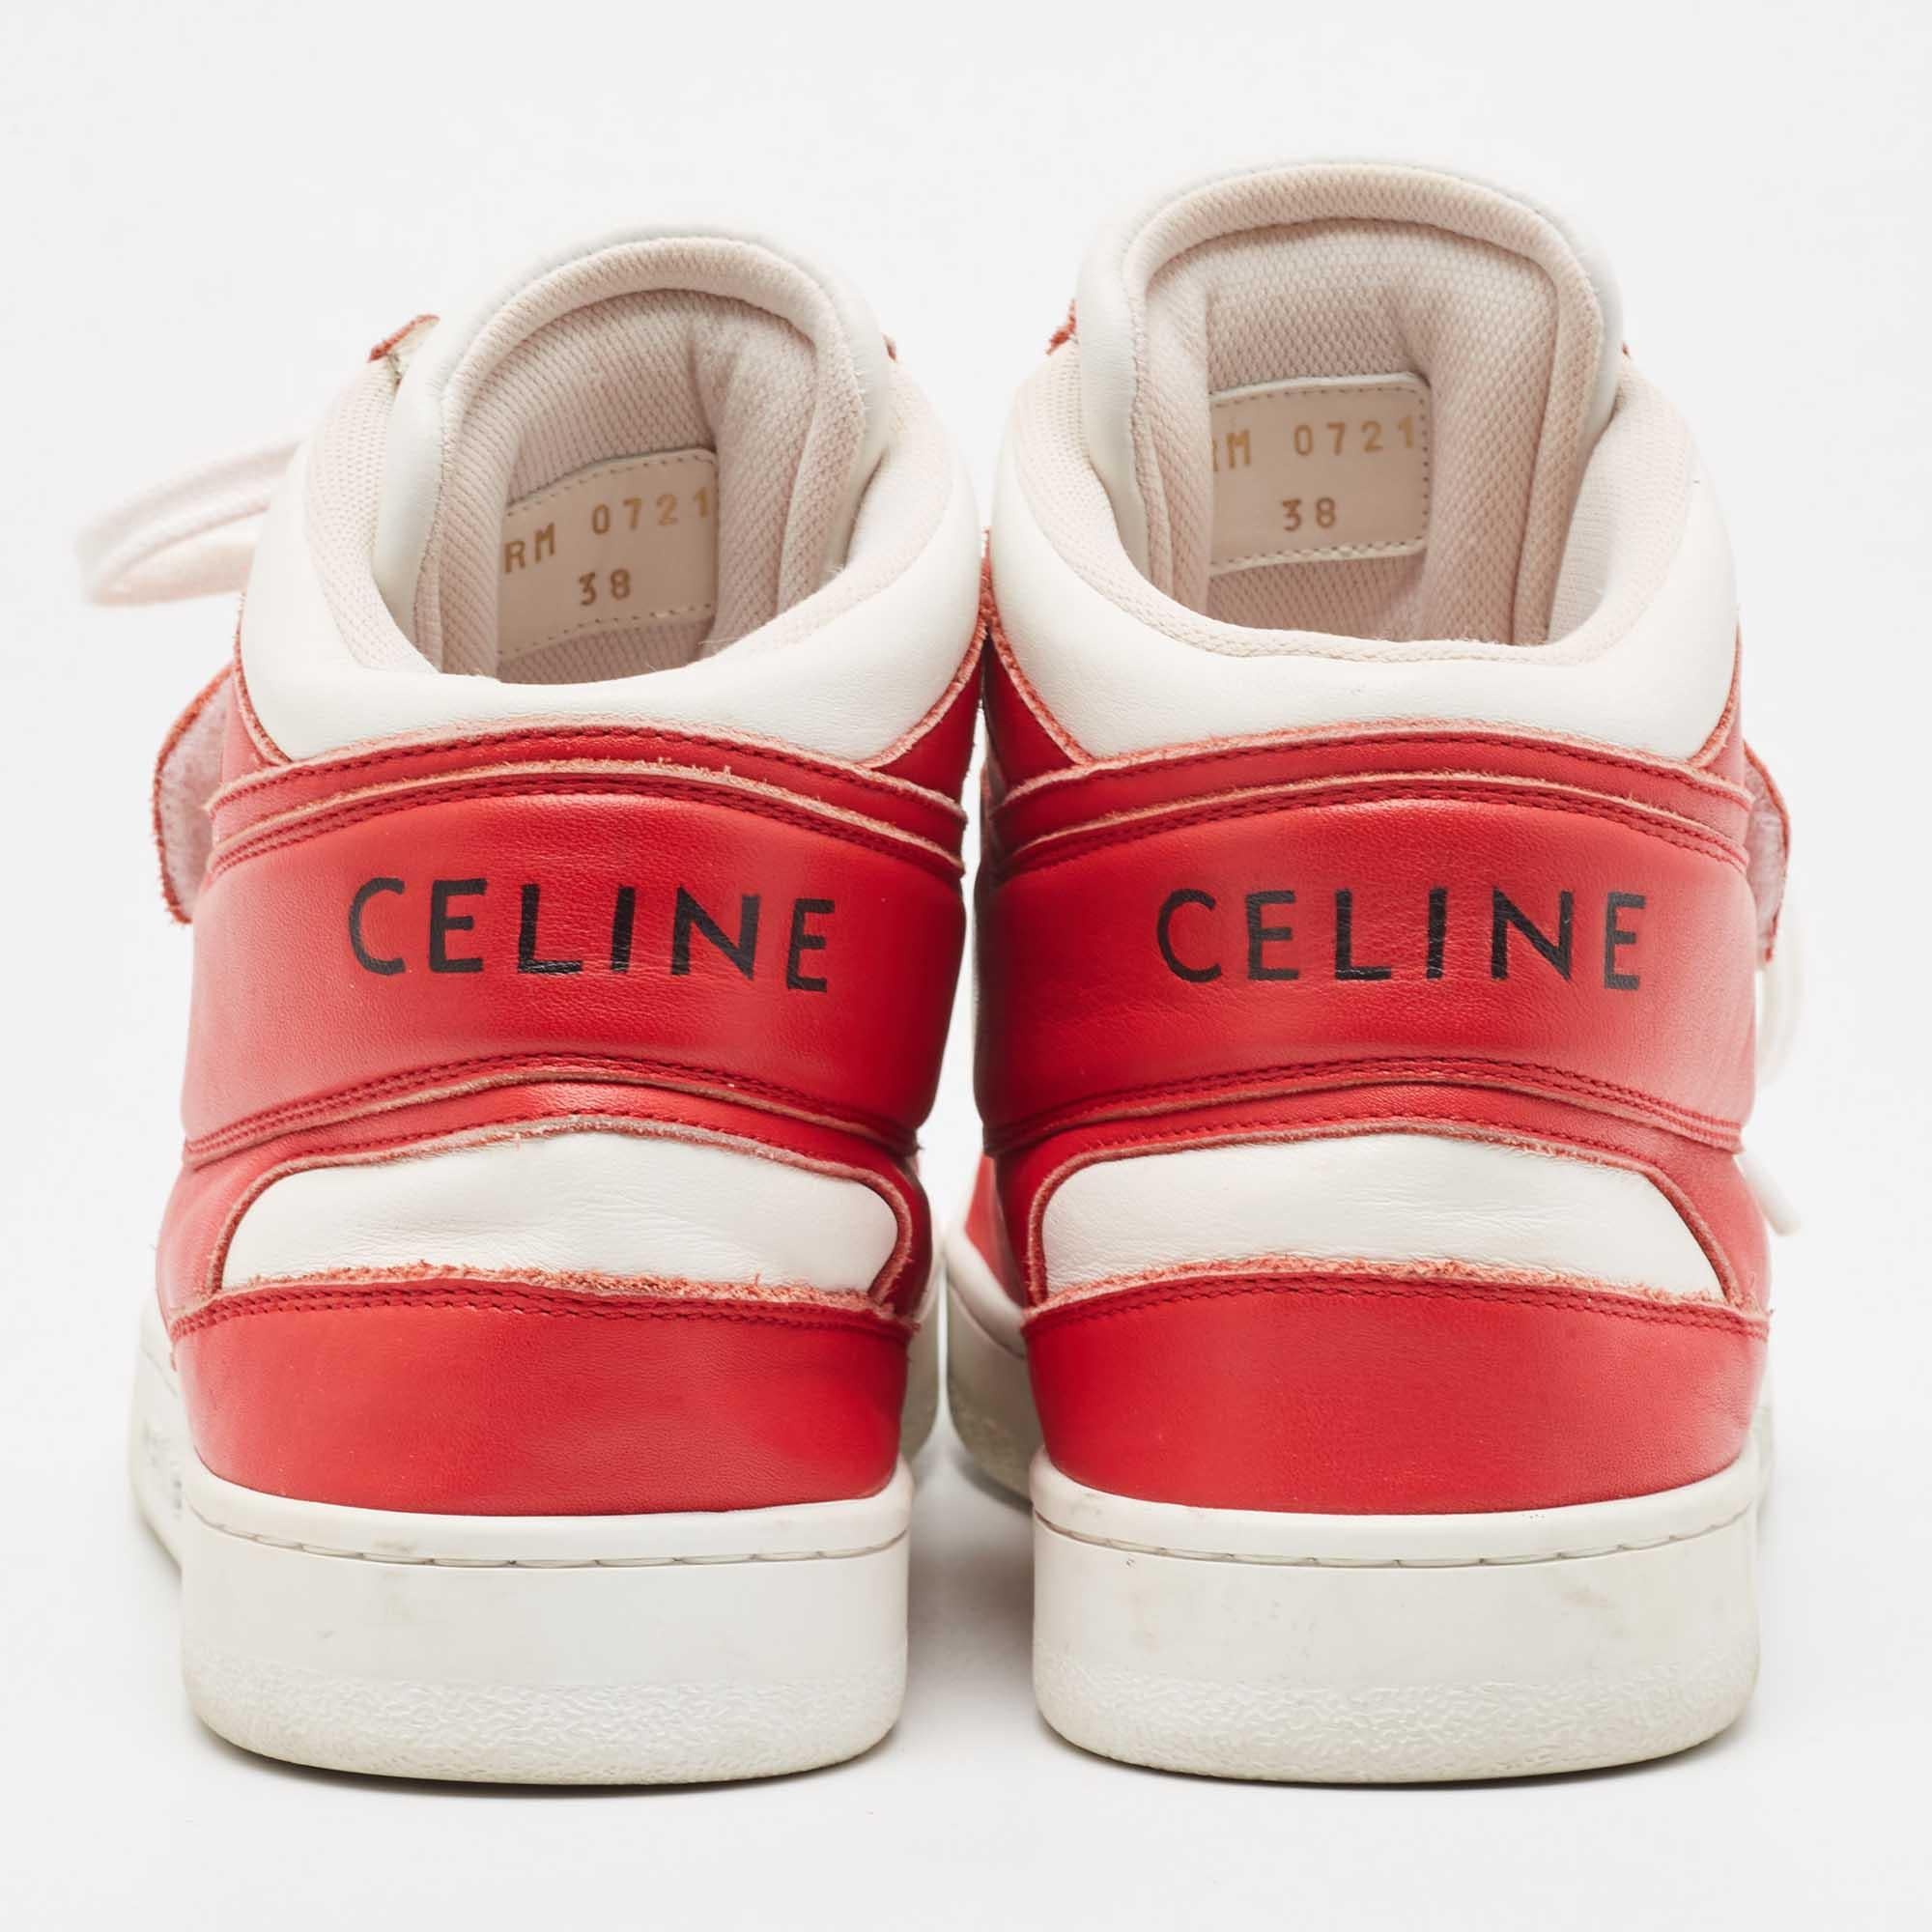 Women's Celine Red/White Leather High Top Sneakers Size 38 For Sale